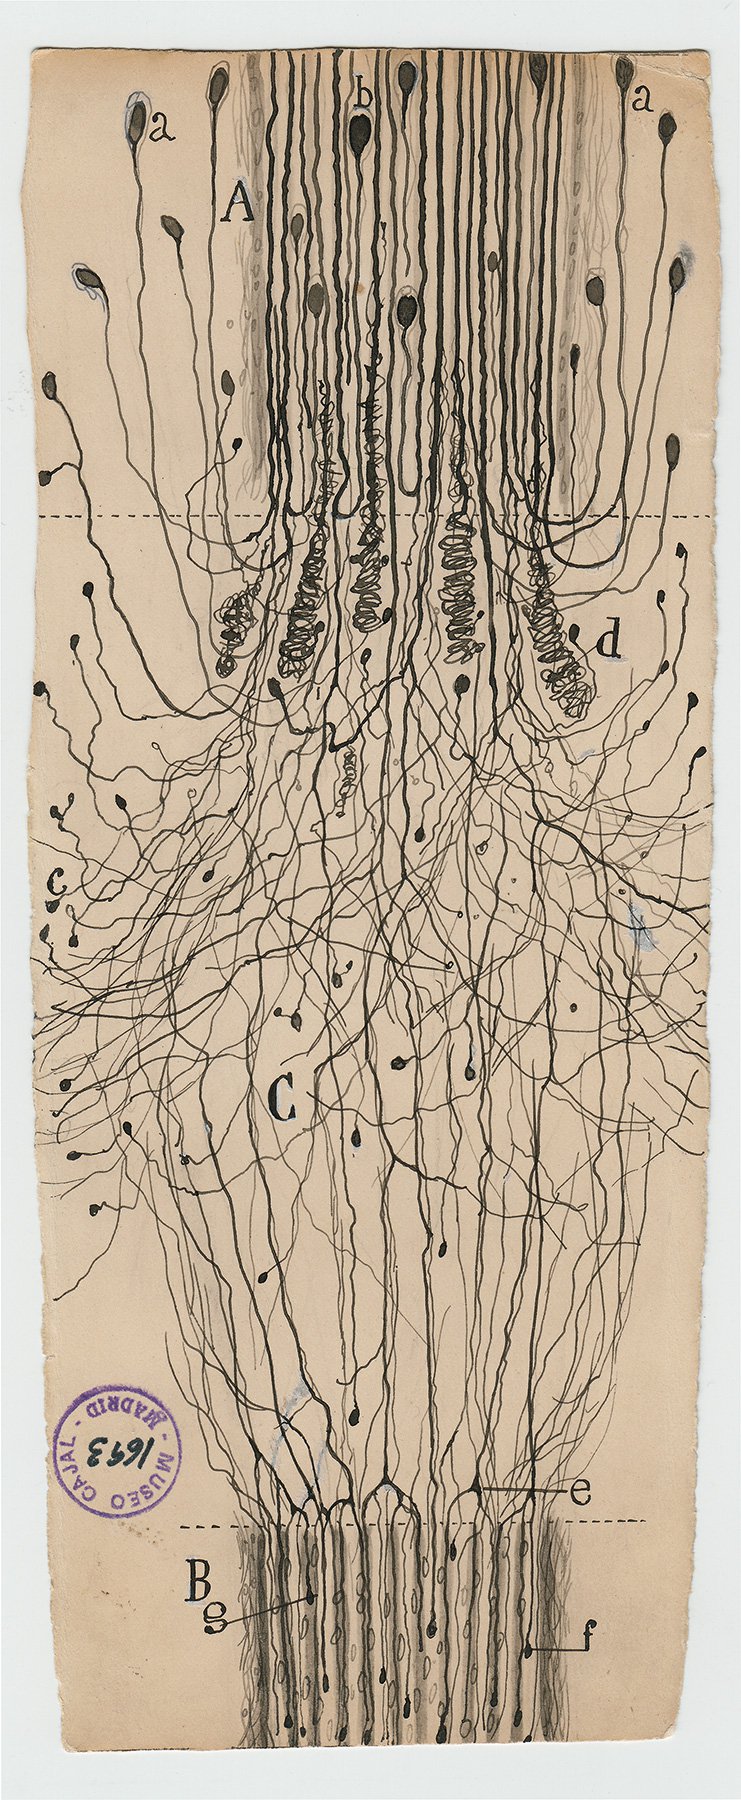 Santiago Ramón y Cajal, "a cut nerve outside the spinal cord," 1913